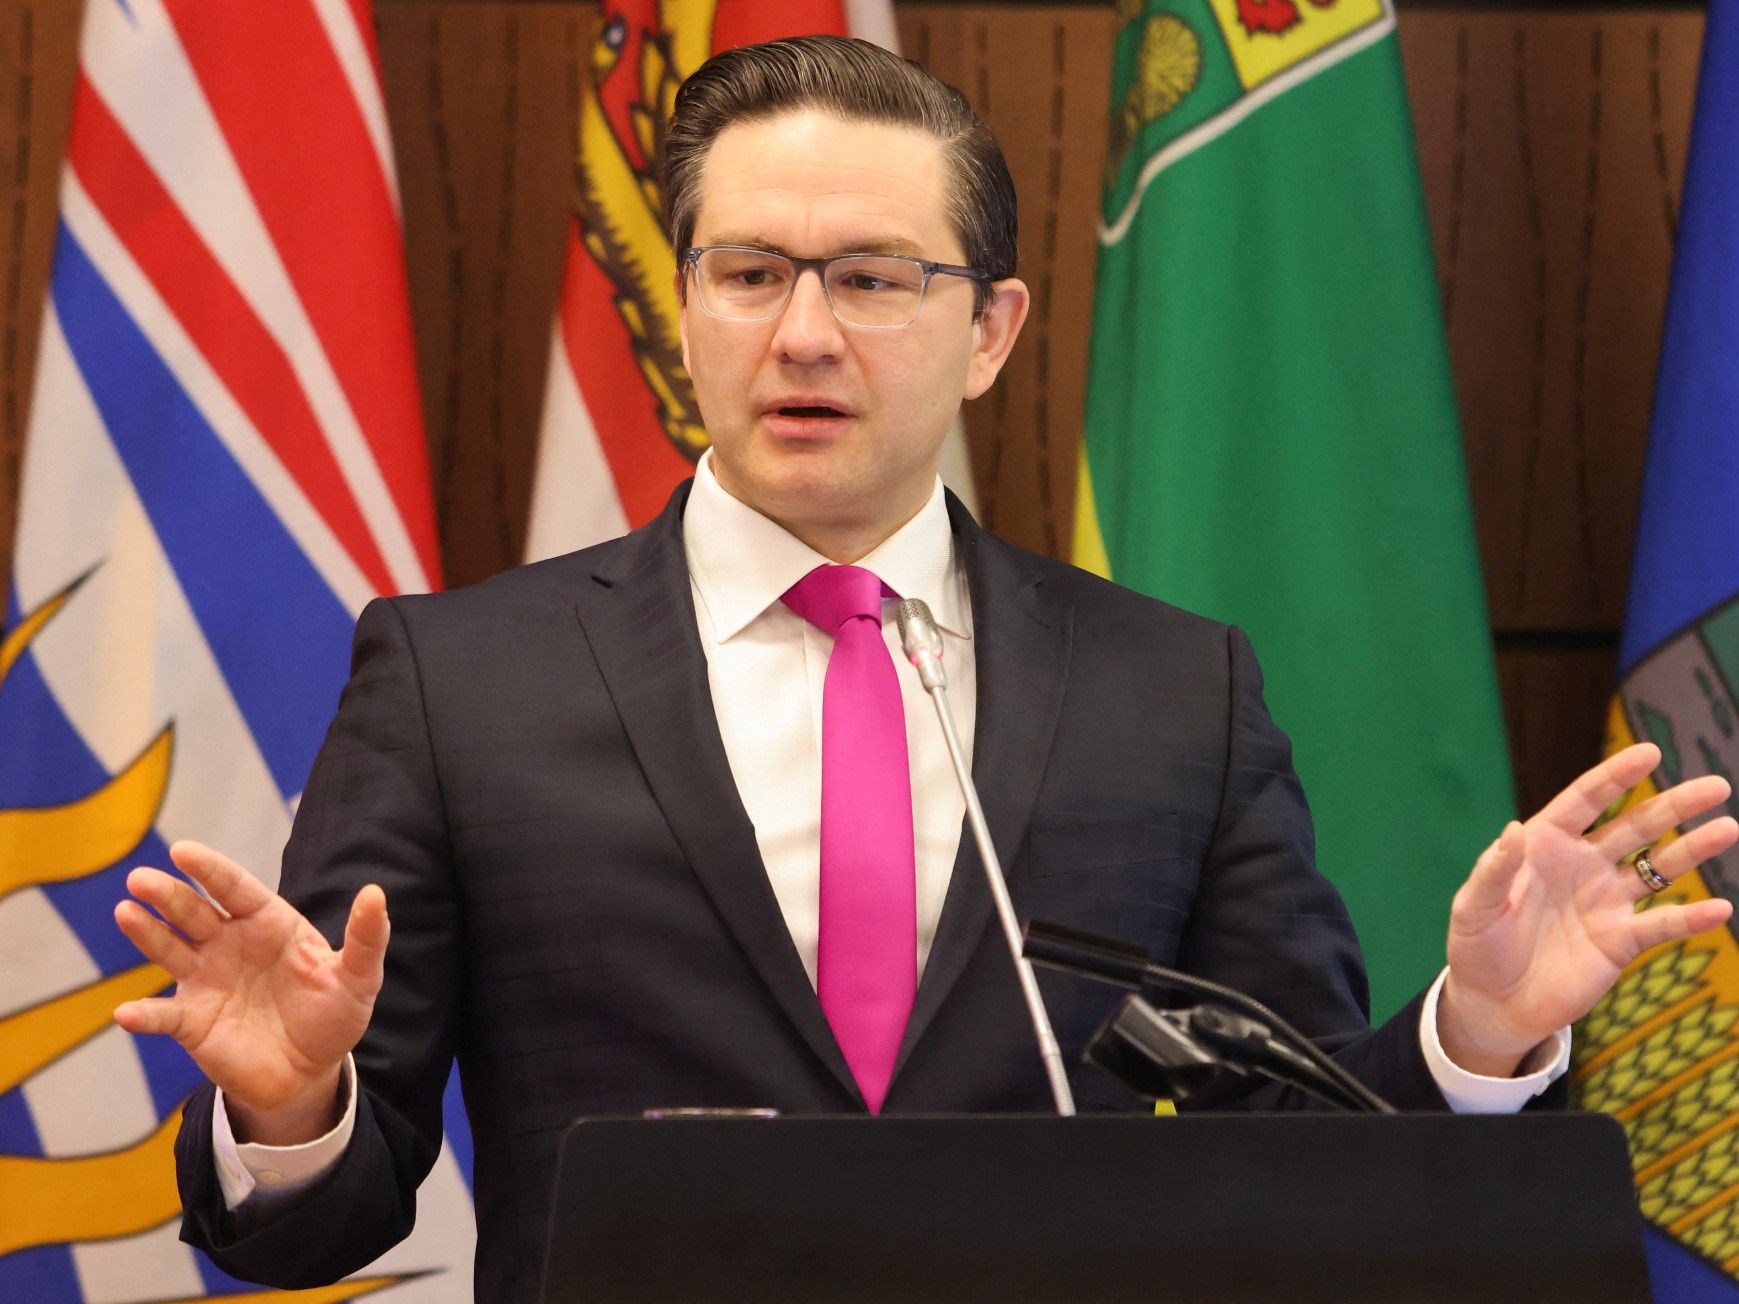 Poilievre challenges Trudeau to fix ‘broken’ Canada or ‘get out of the way’